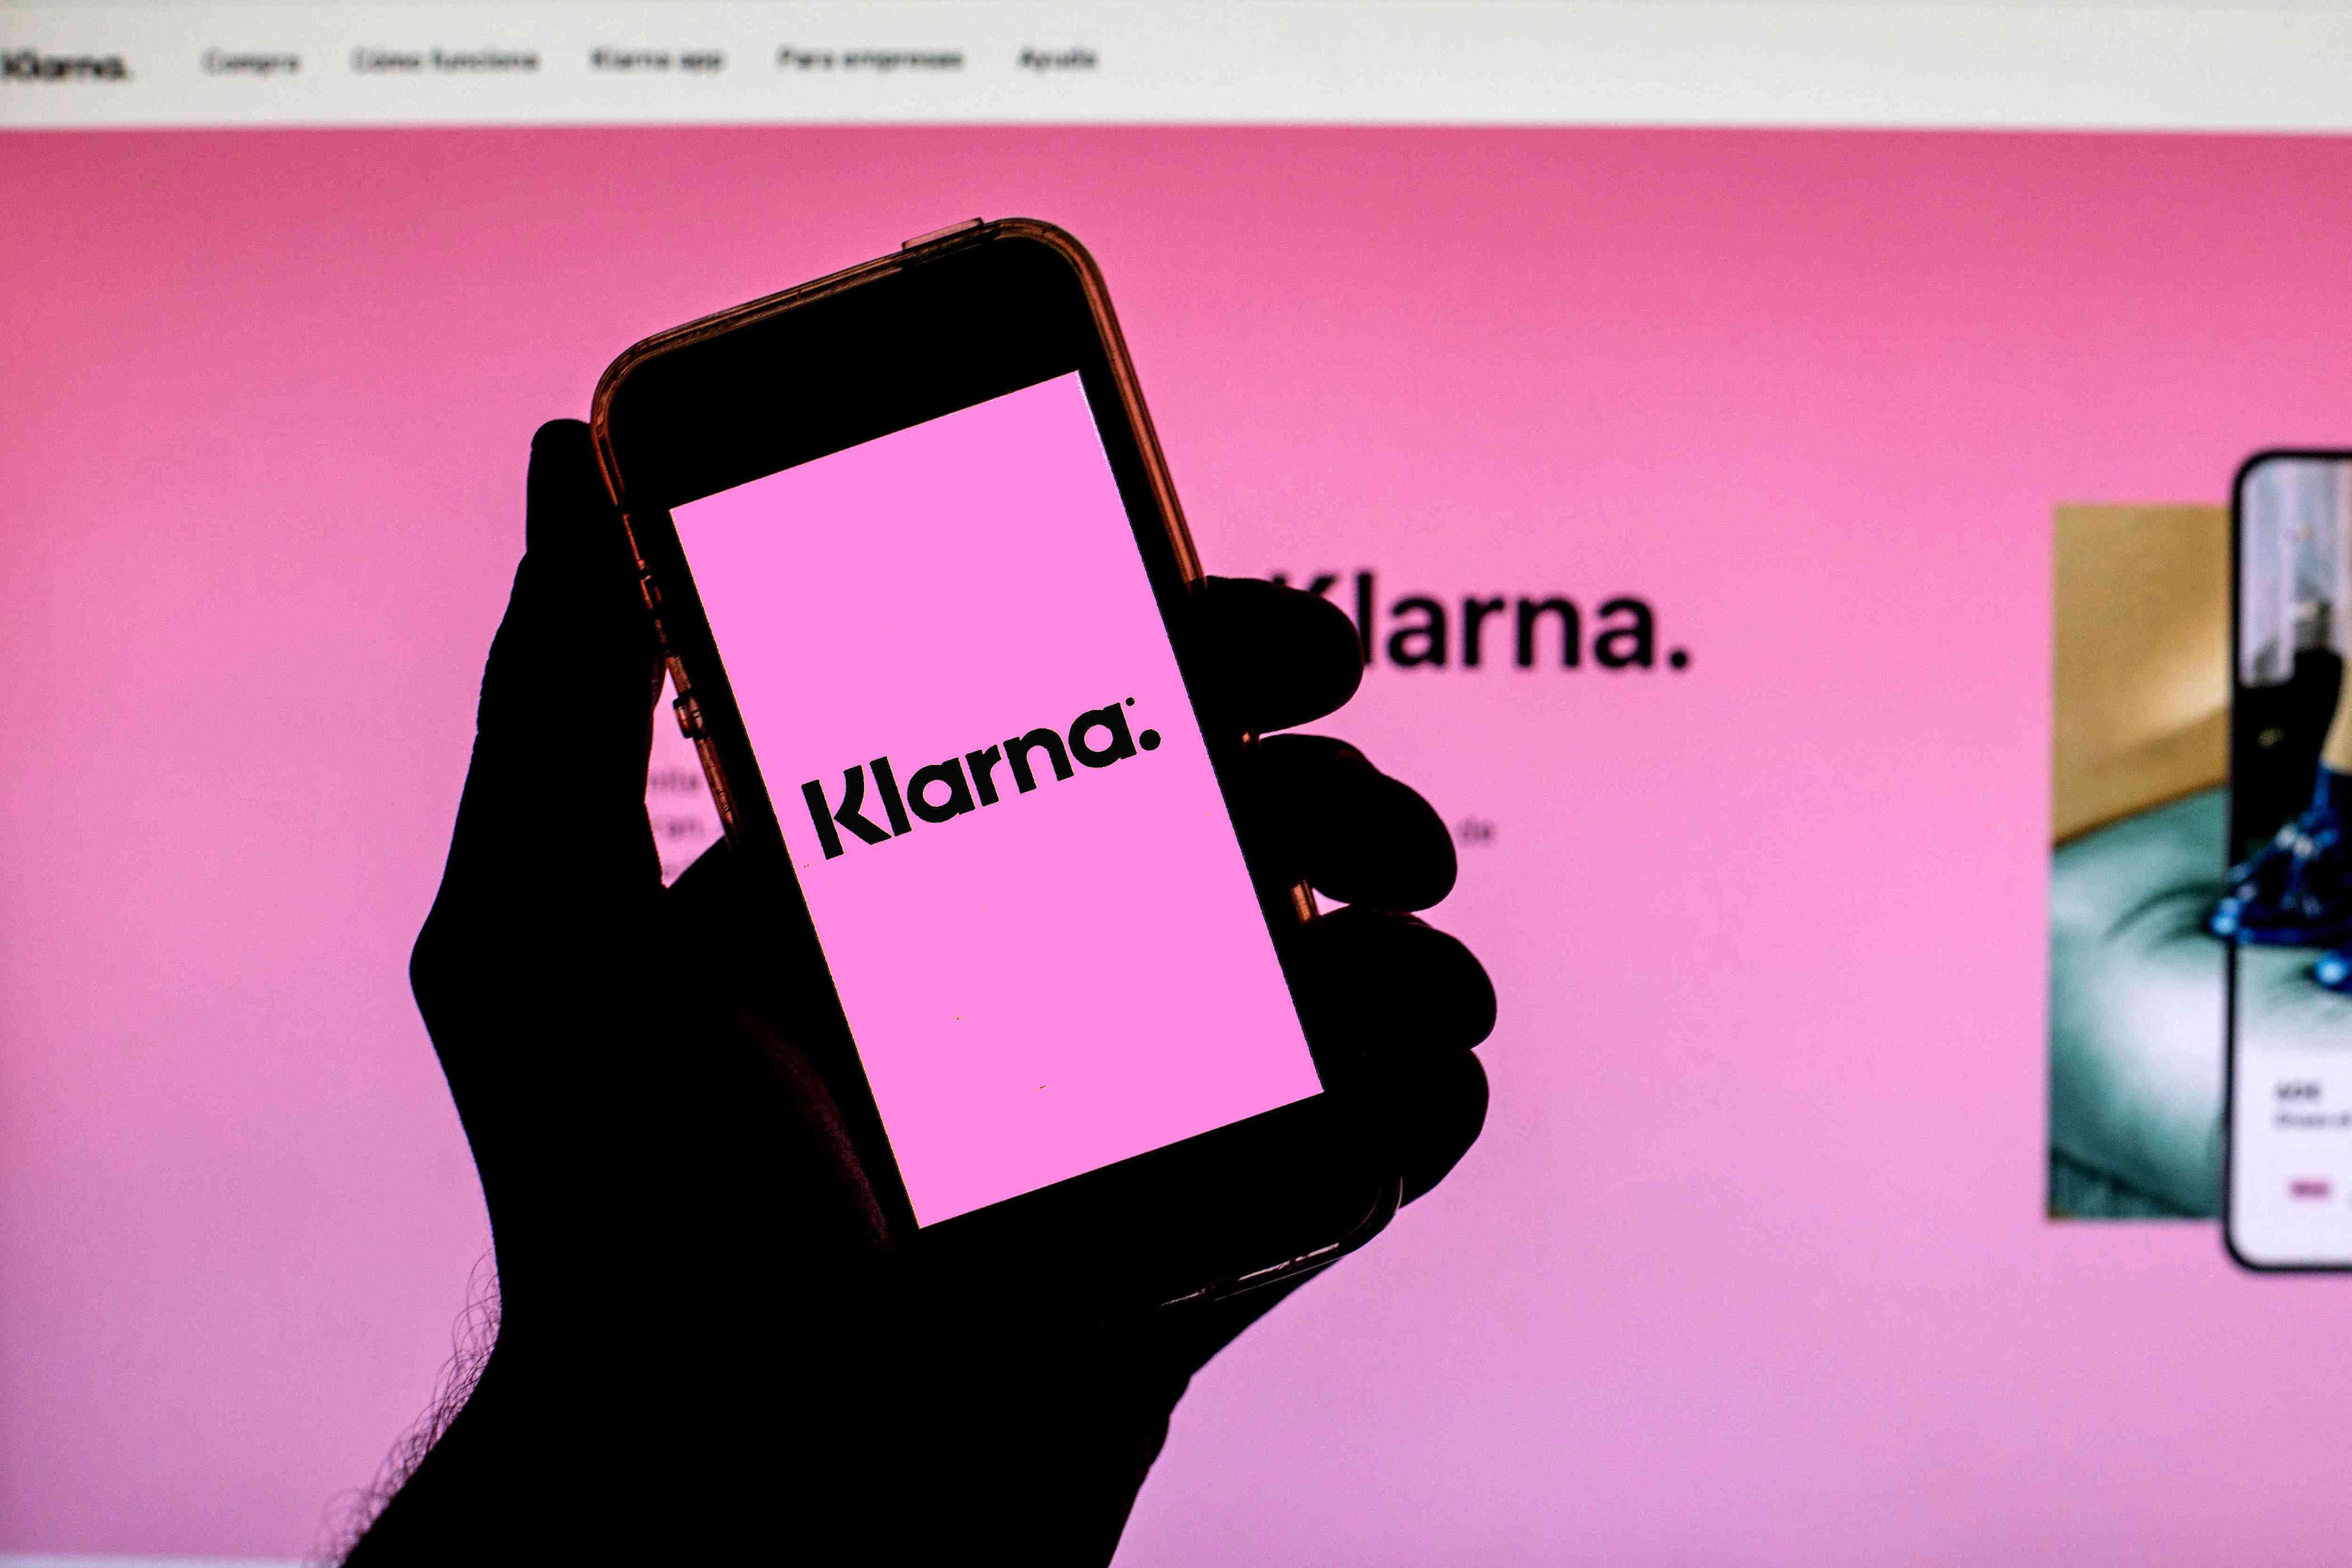 Klarna Launches AI-Powered Image Recognition Tool - Image